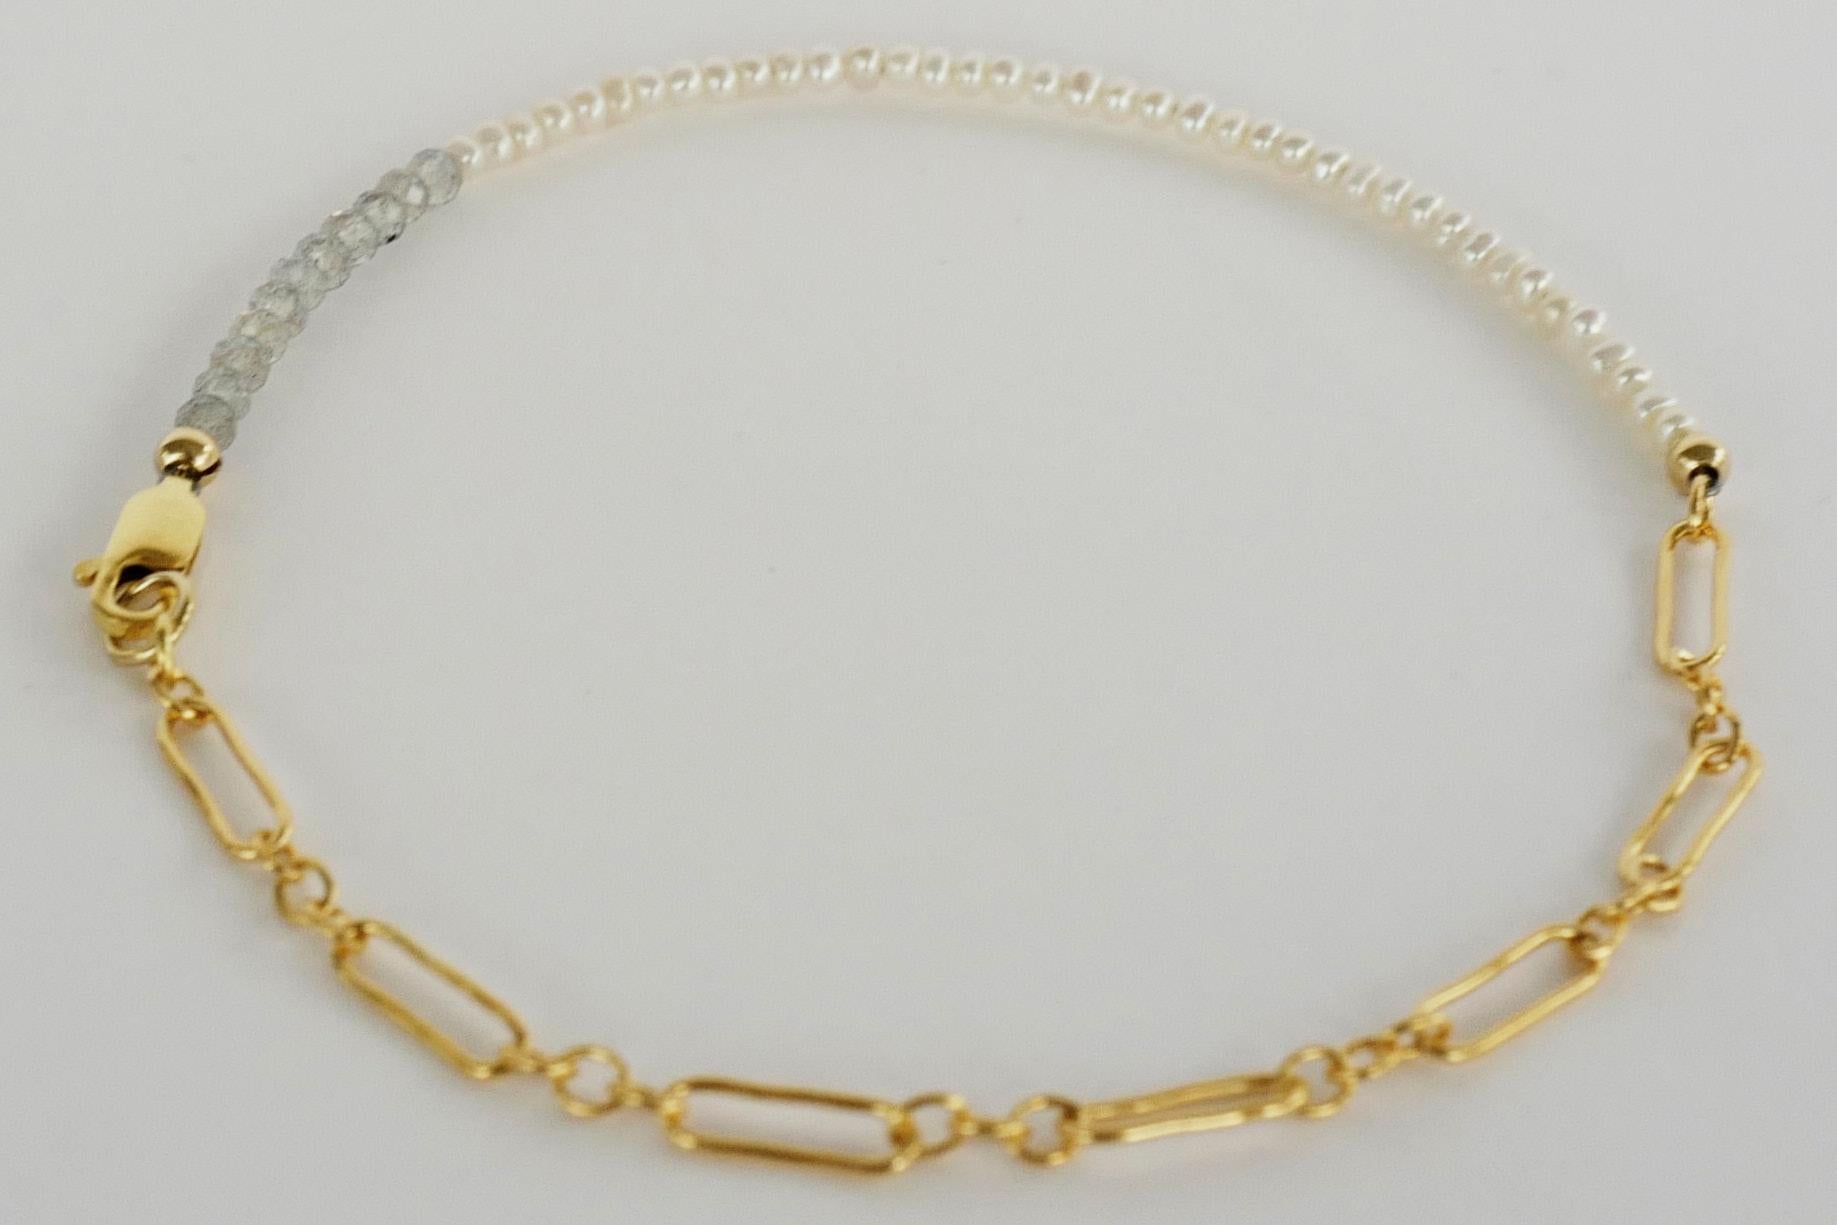 White Pearl Labradorite Ankle Bracelet Beaded Gold Filled Chain J Dauphin
can also be used as a bracelet as chain is adjustable

